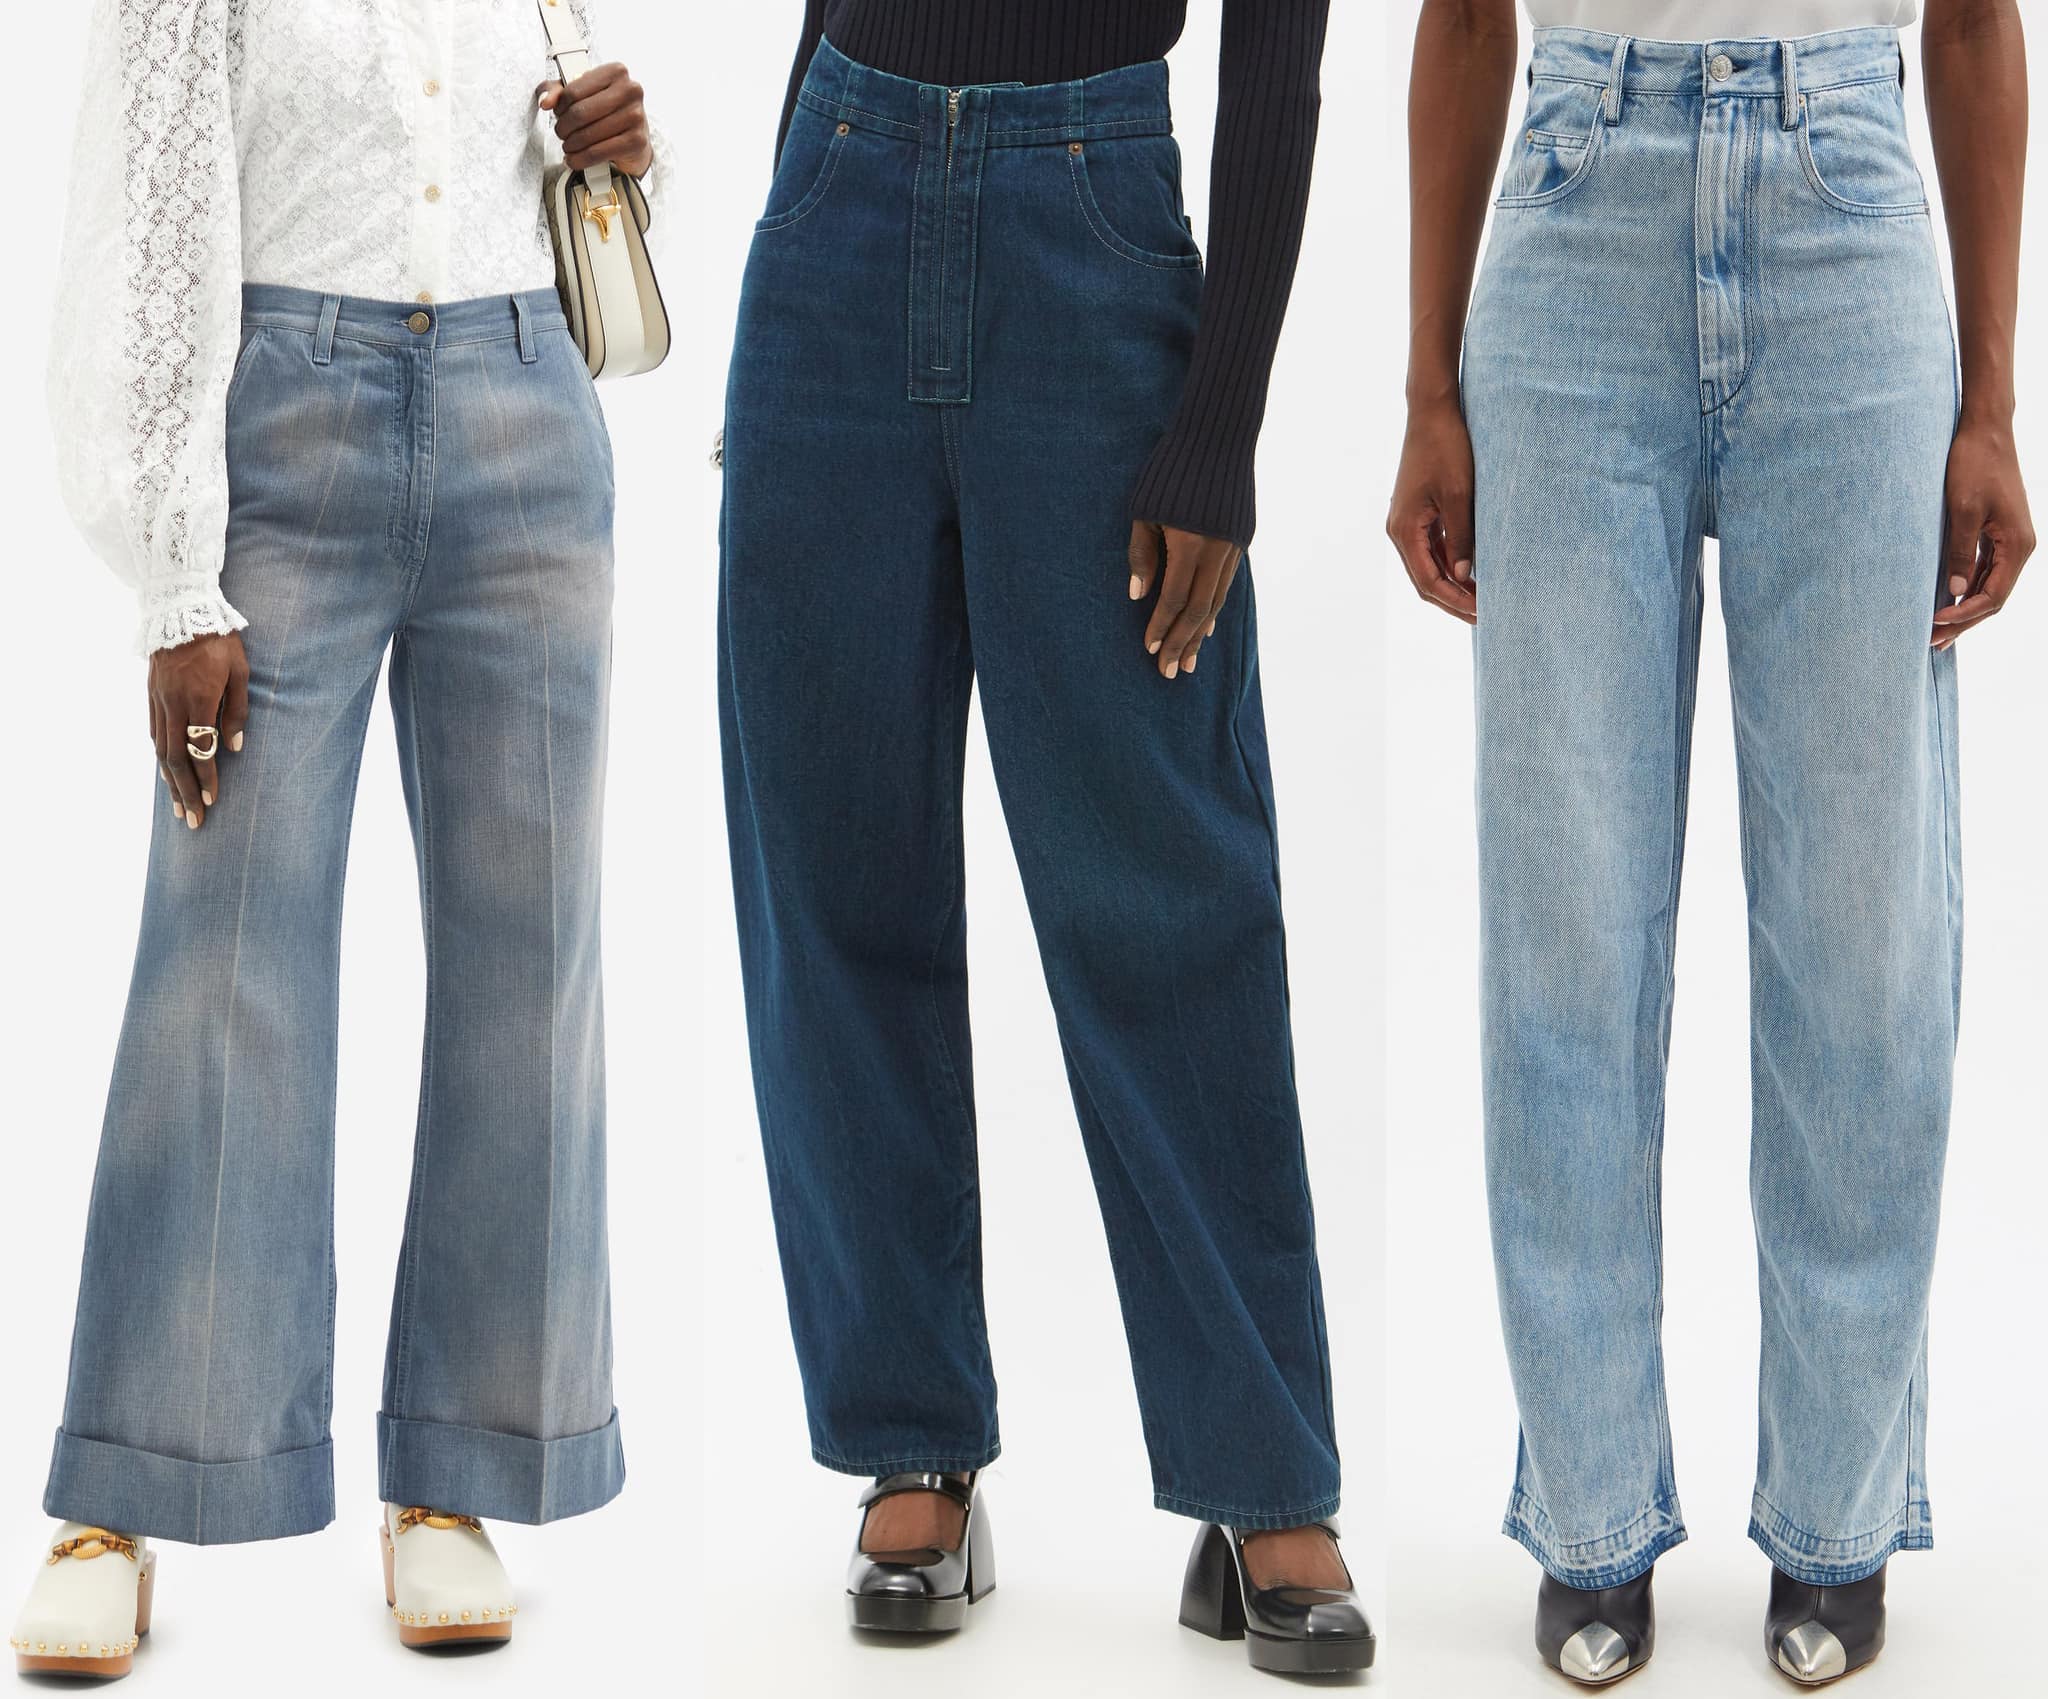 High-rise wide-leg jeans have a fit above the belly button and a full-length wide leg